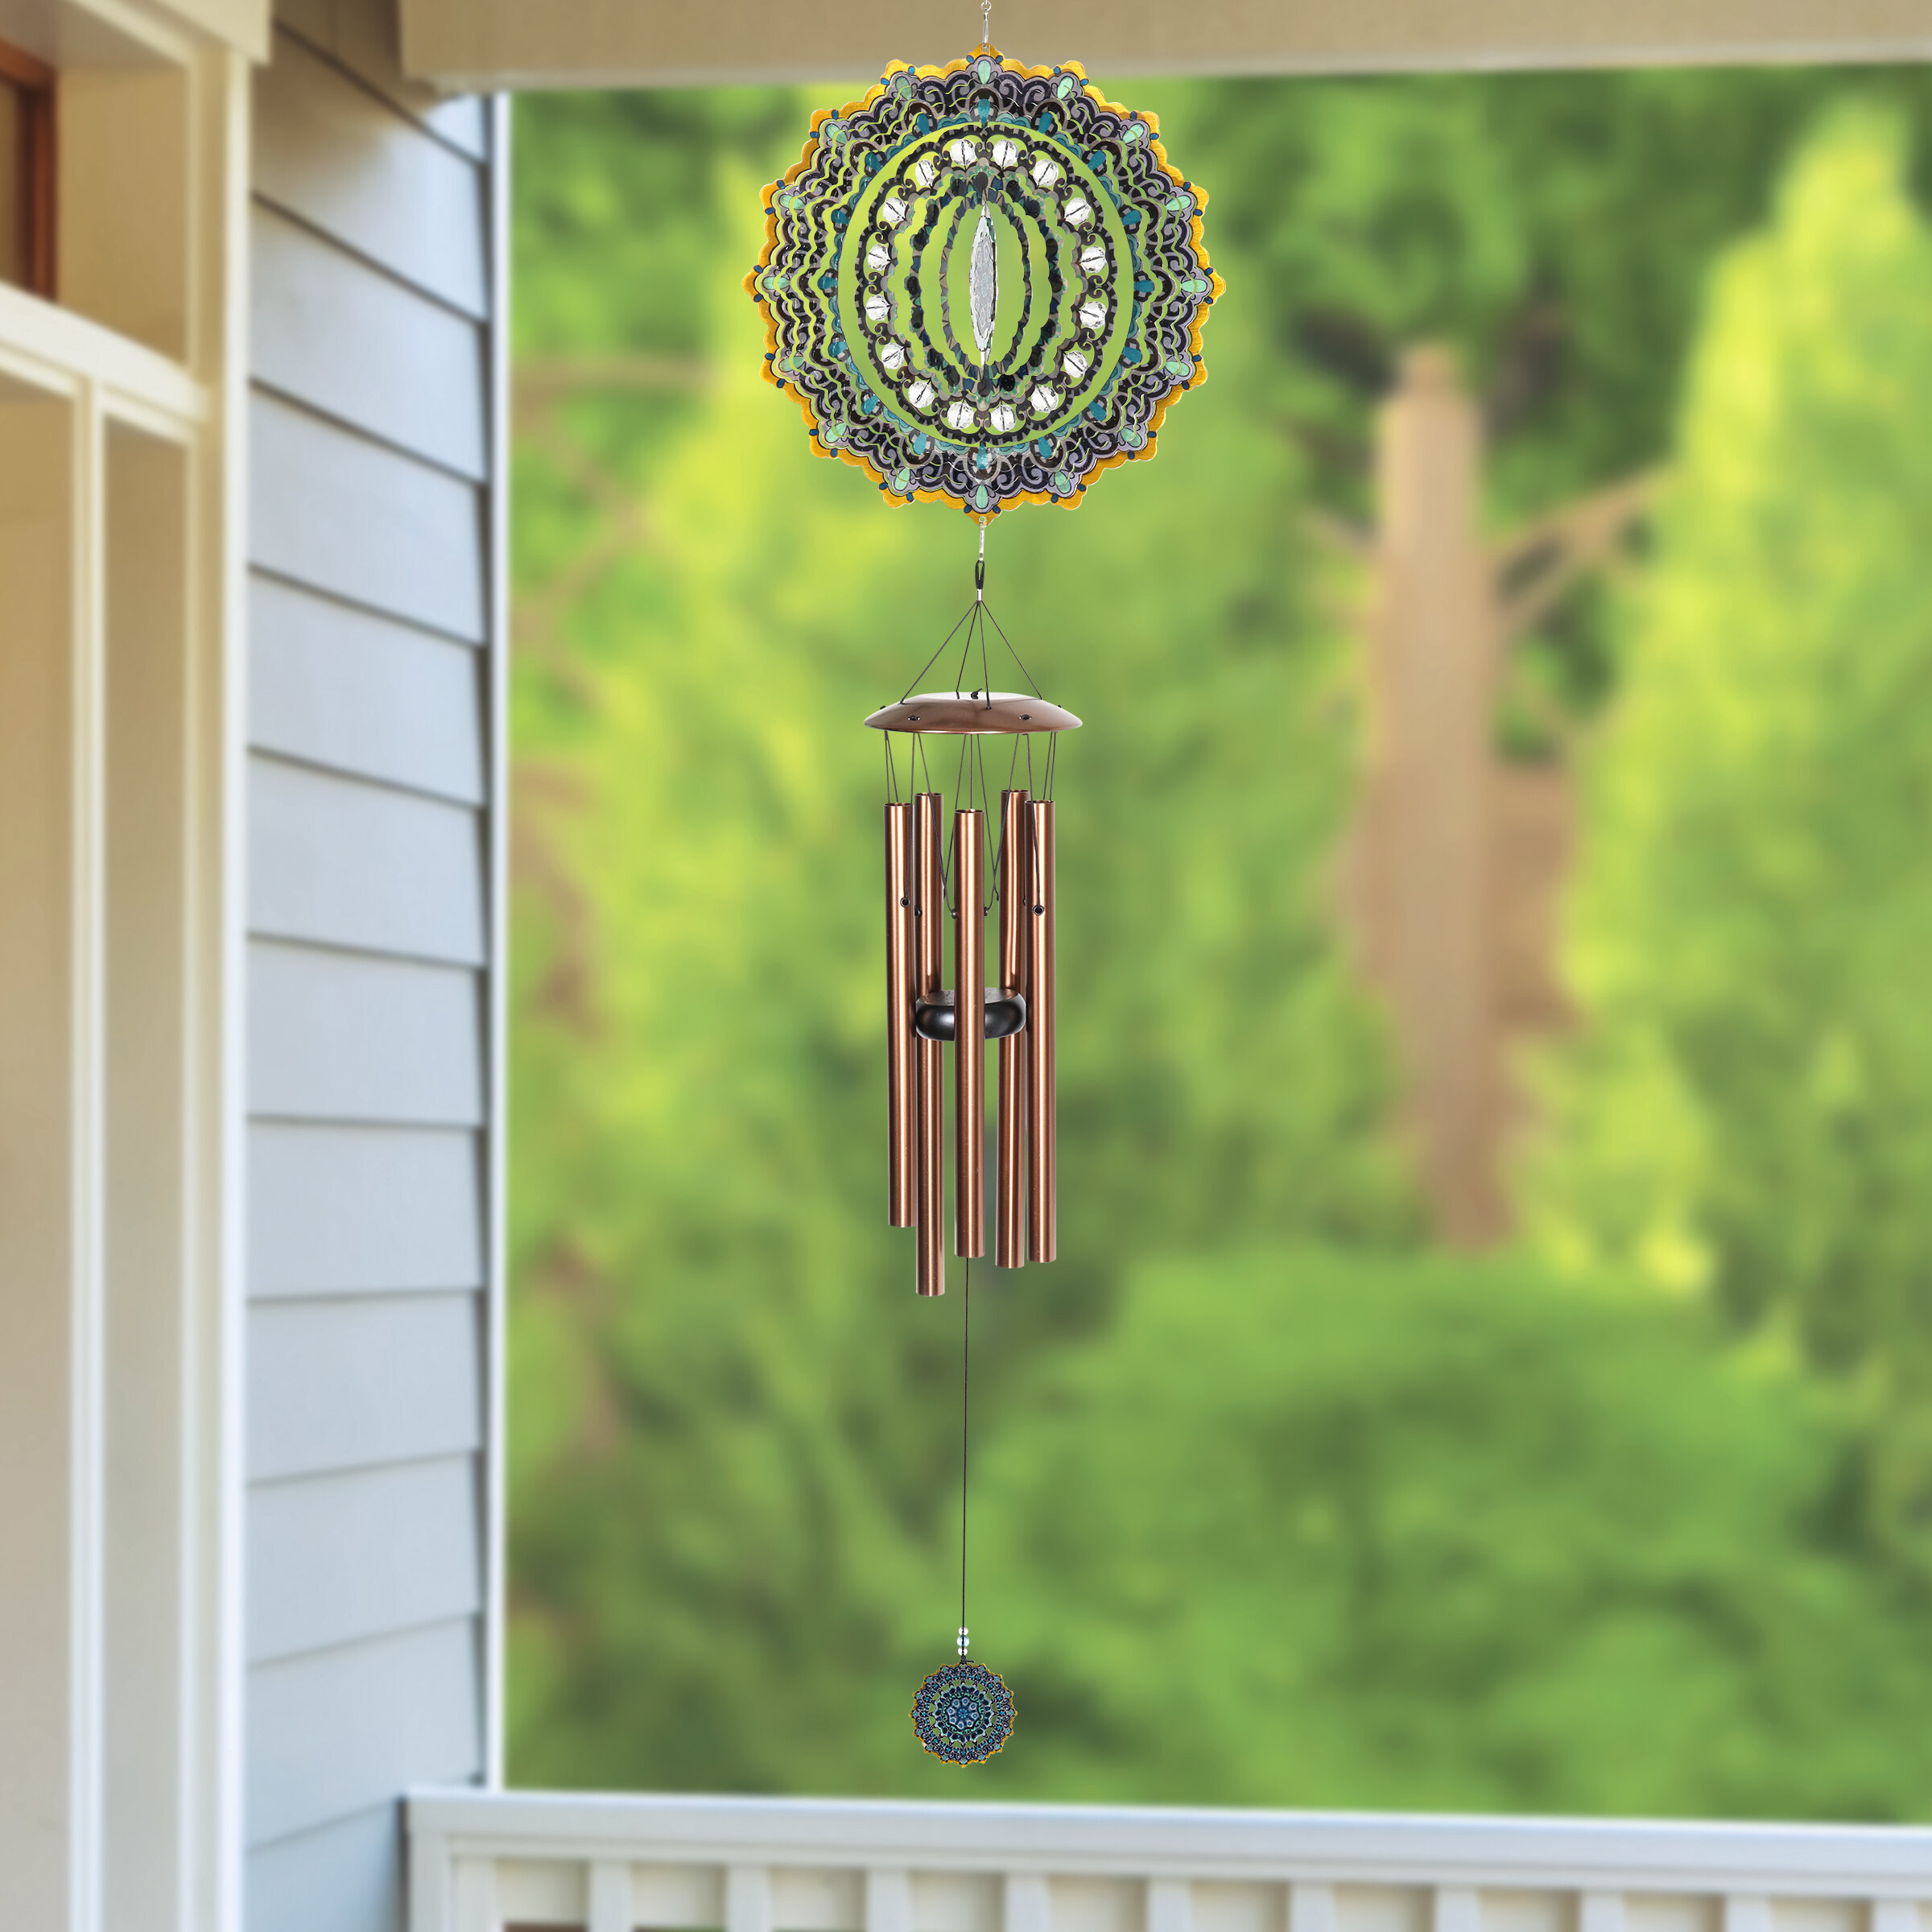 Beautiful Sounds And Elegant Design For Outdoor Garden Home Window DIY Hanging Decoration Wind Spinner Colorful Wind Chime Pendant